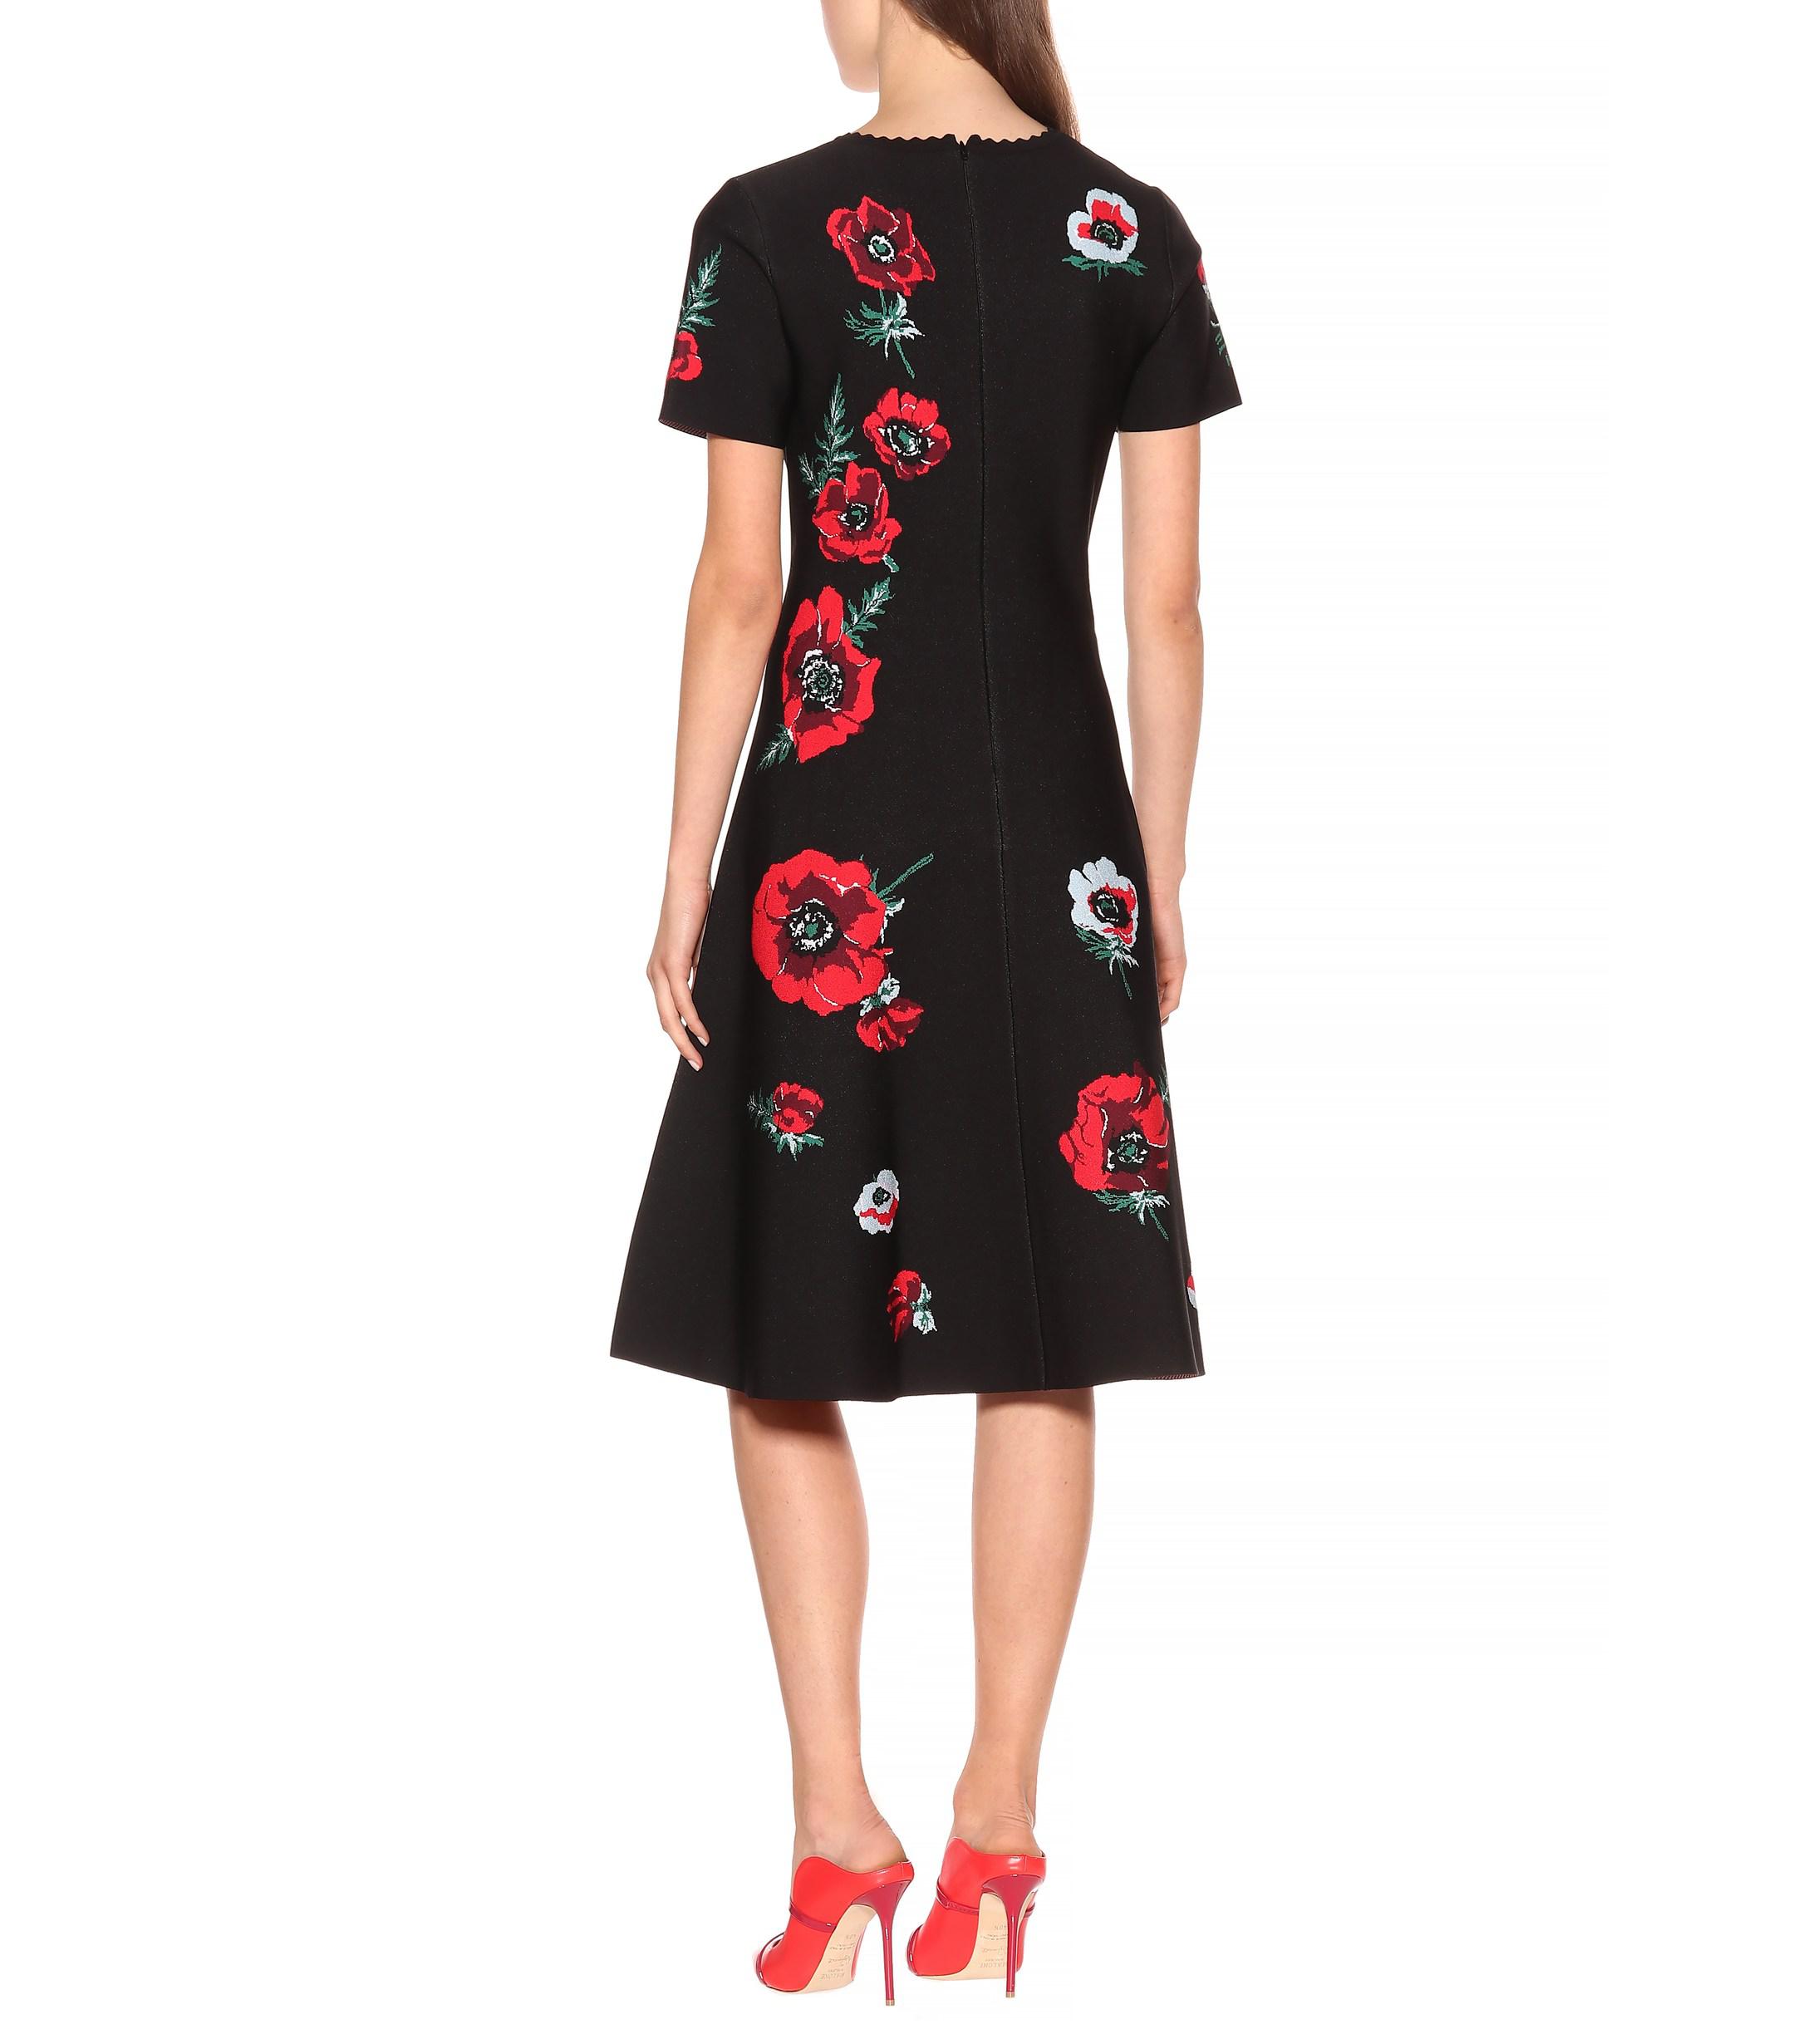 black dress with poppies